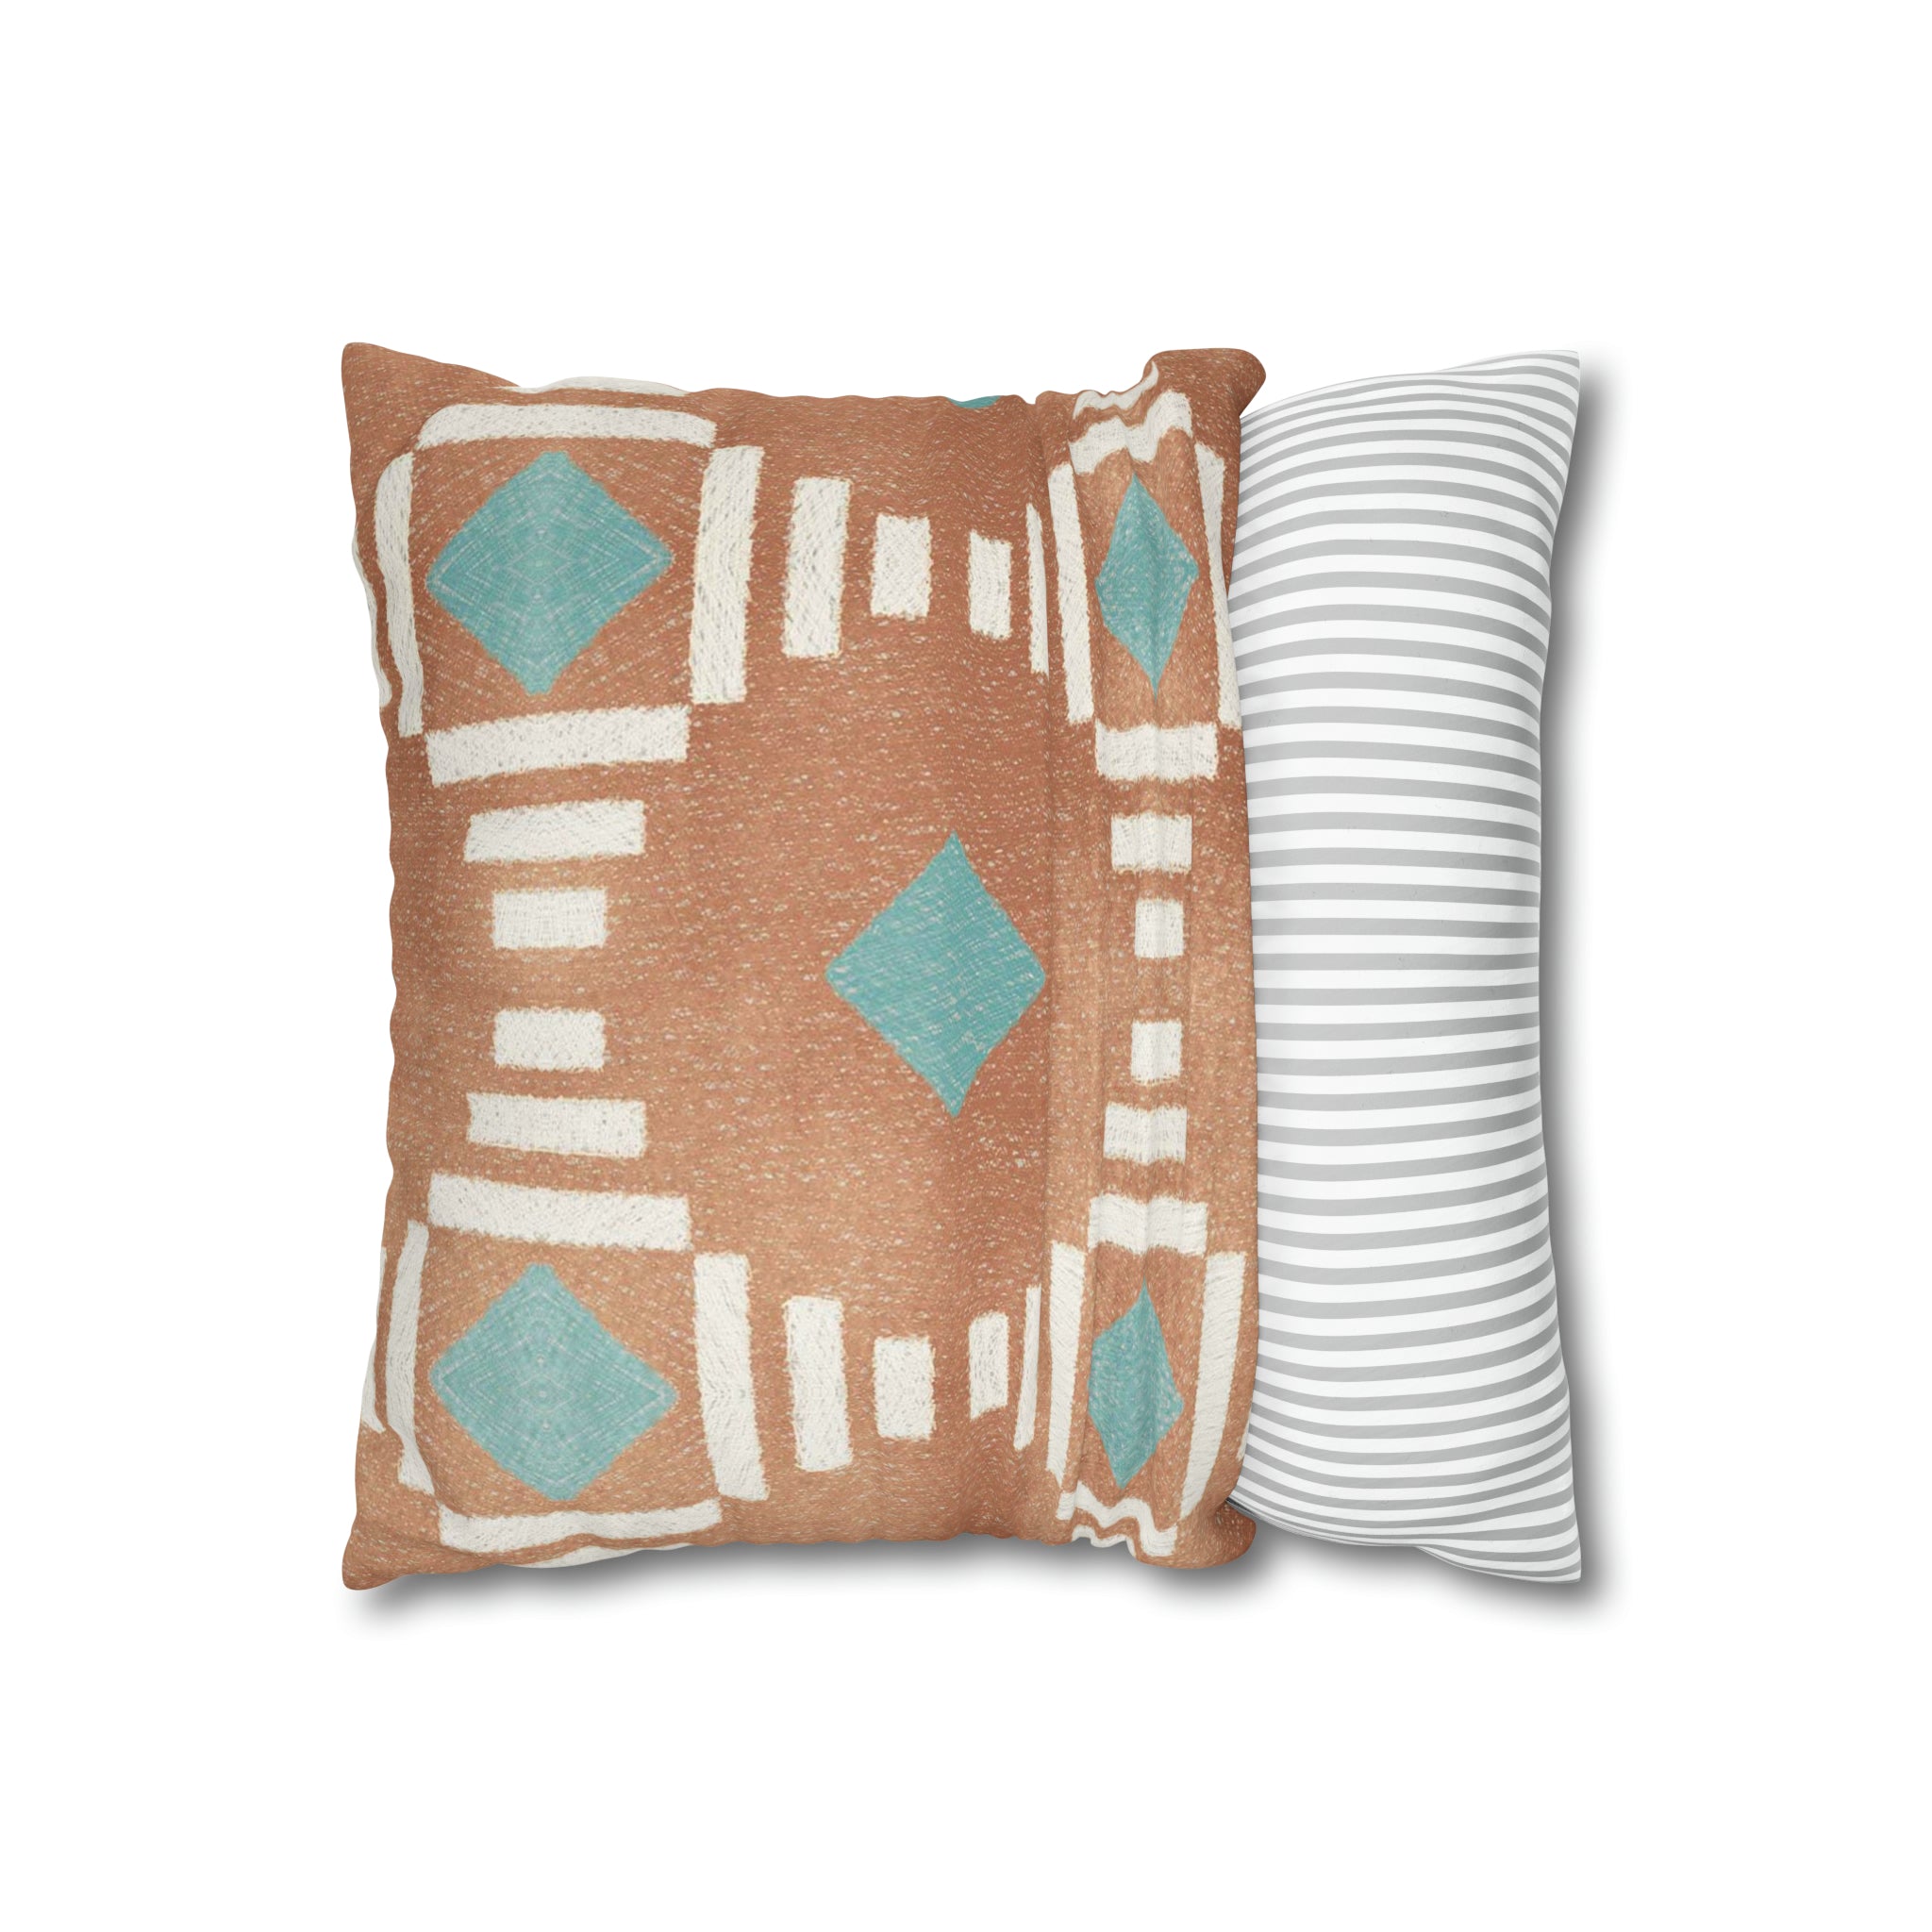 a pair of decorative pillows on a white background